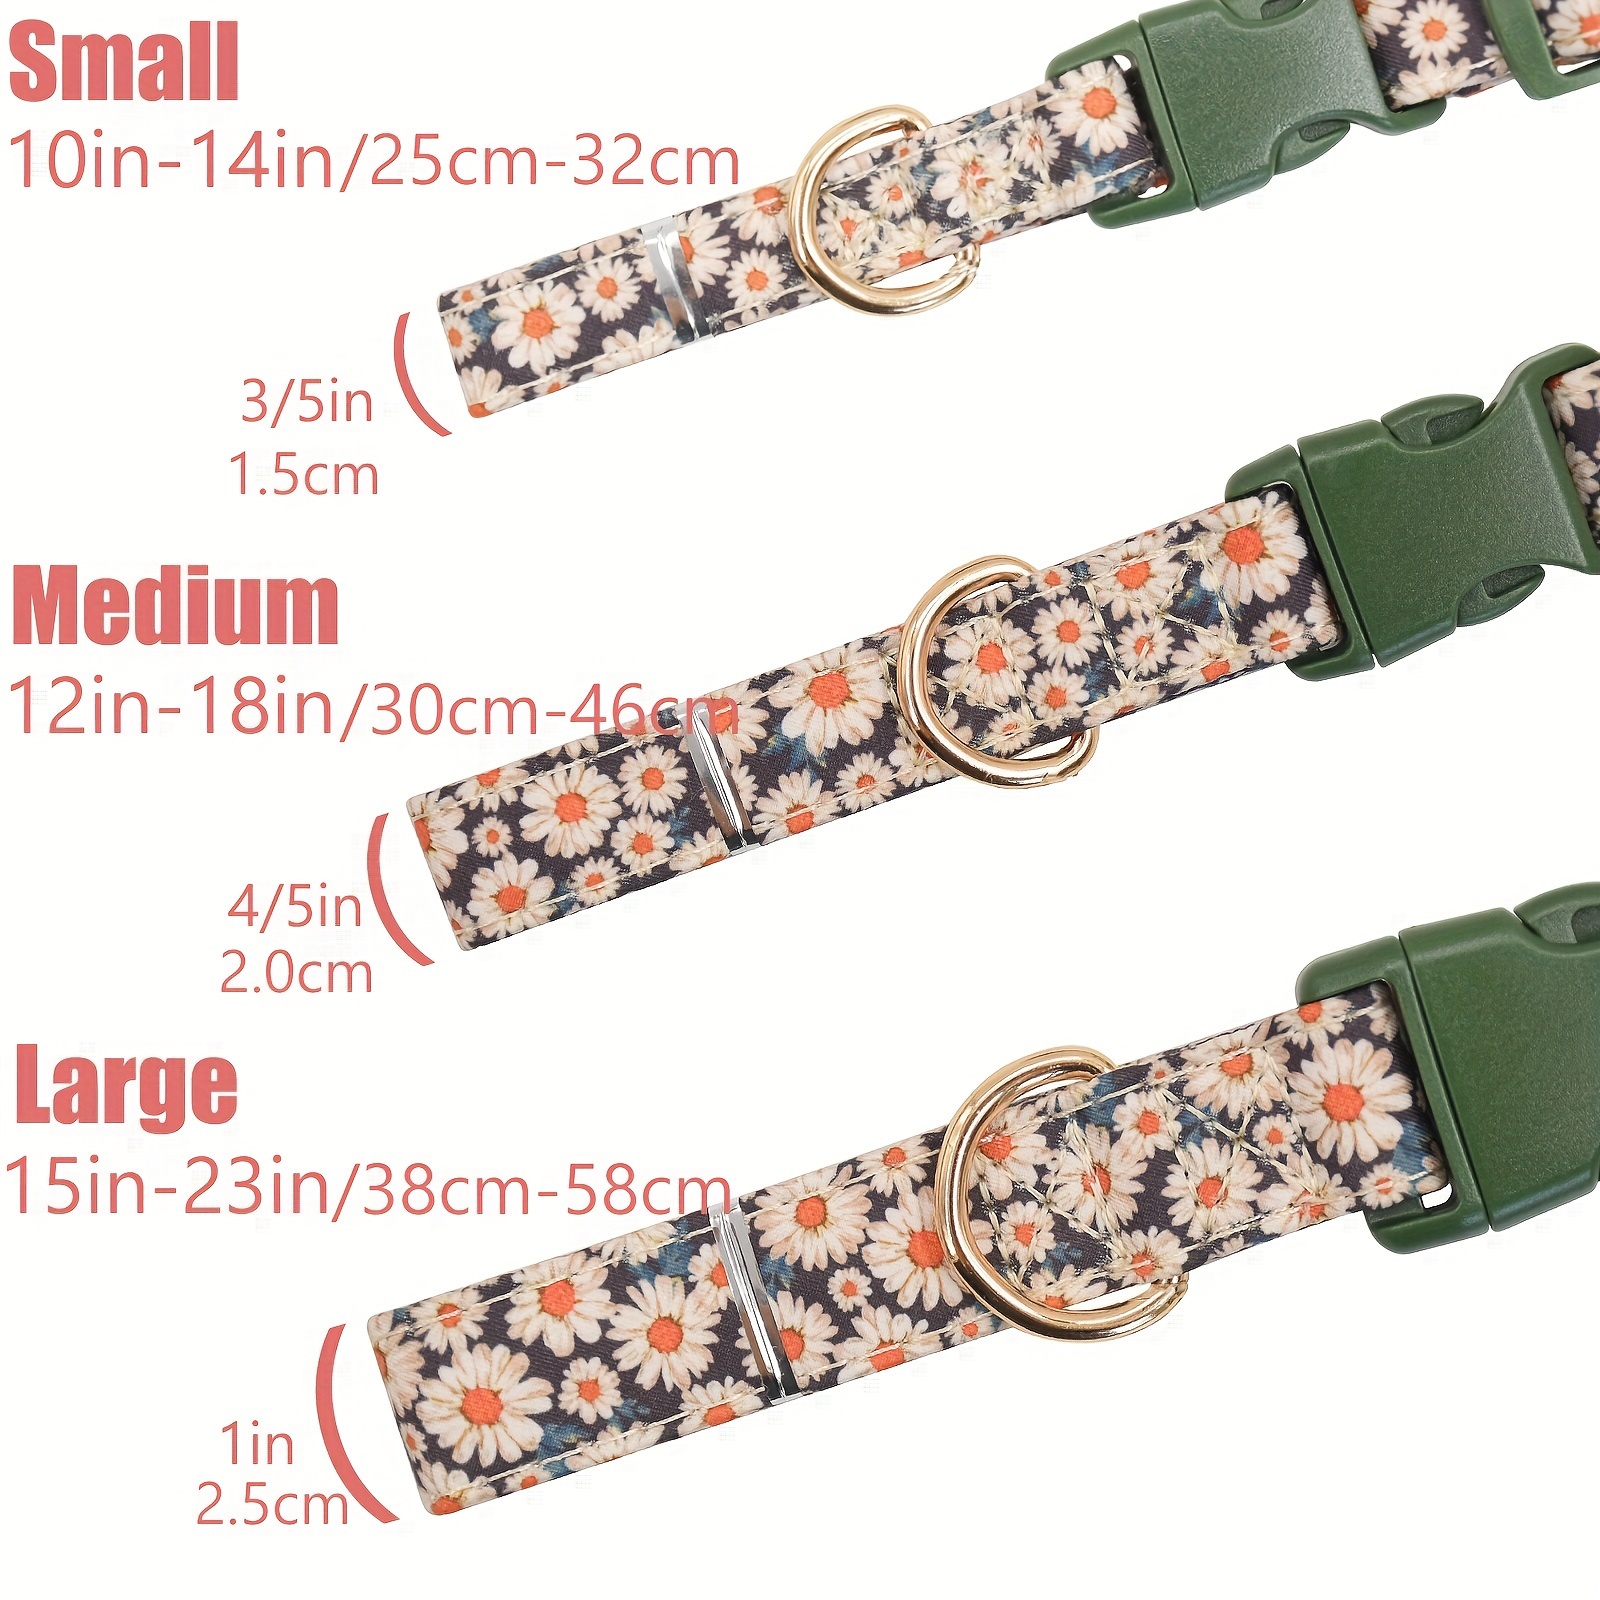 Cute Daisy Dog Collar Cotton Comfort Dog Collar Suitable For Small